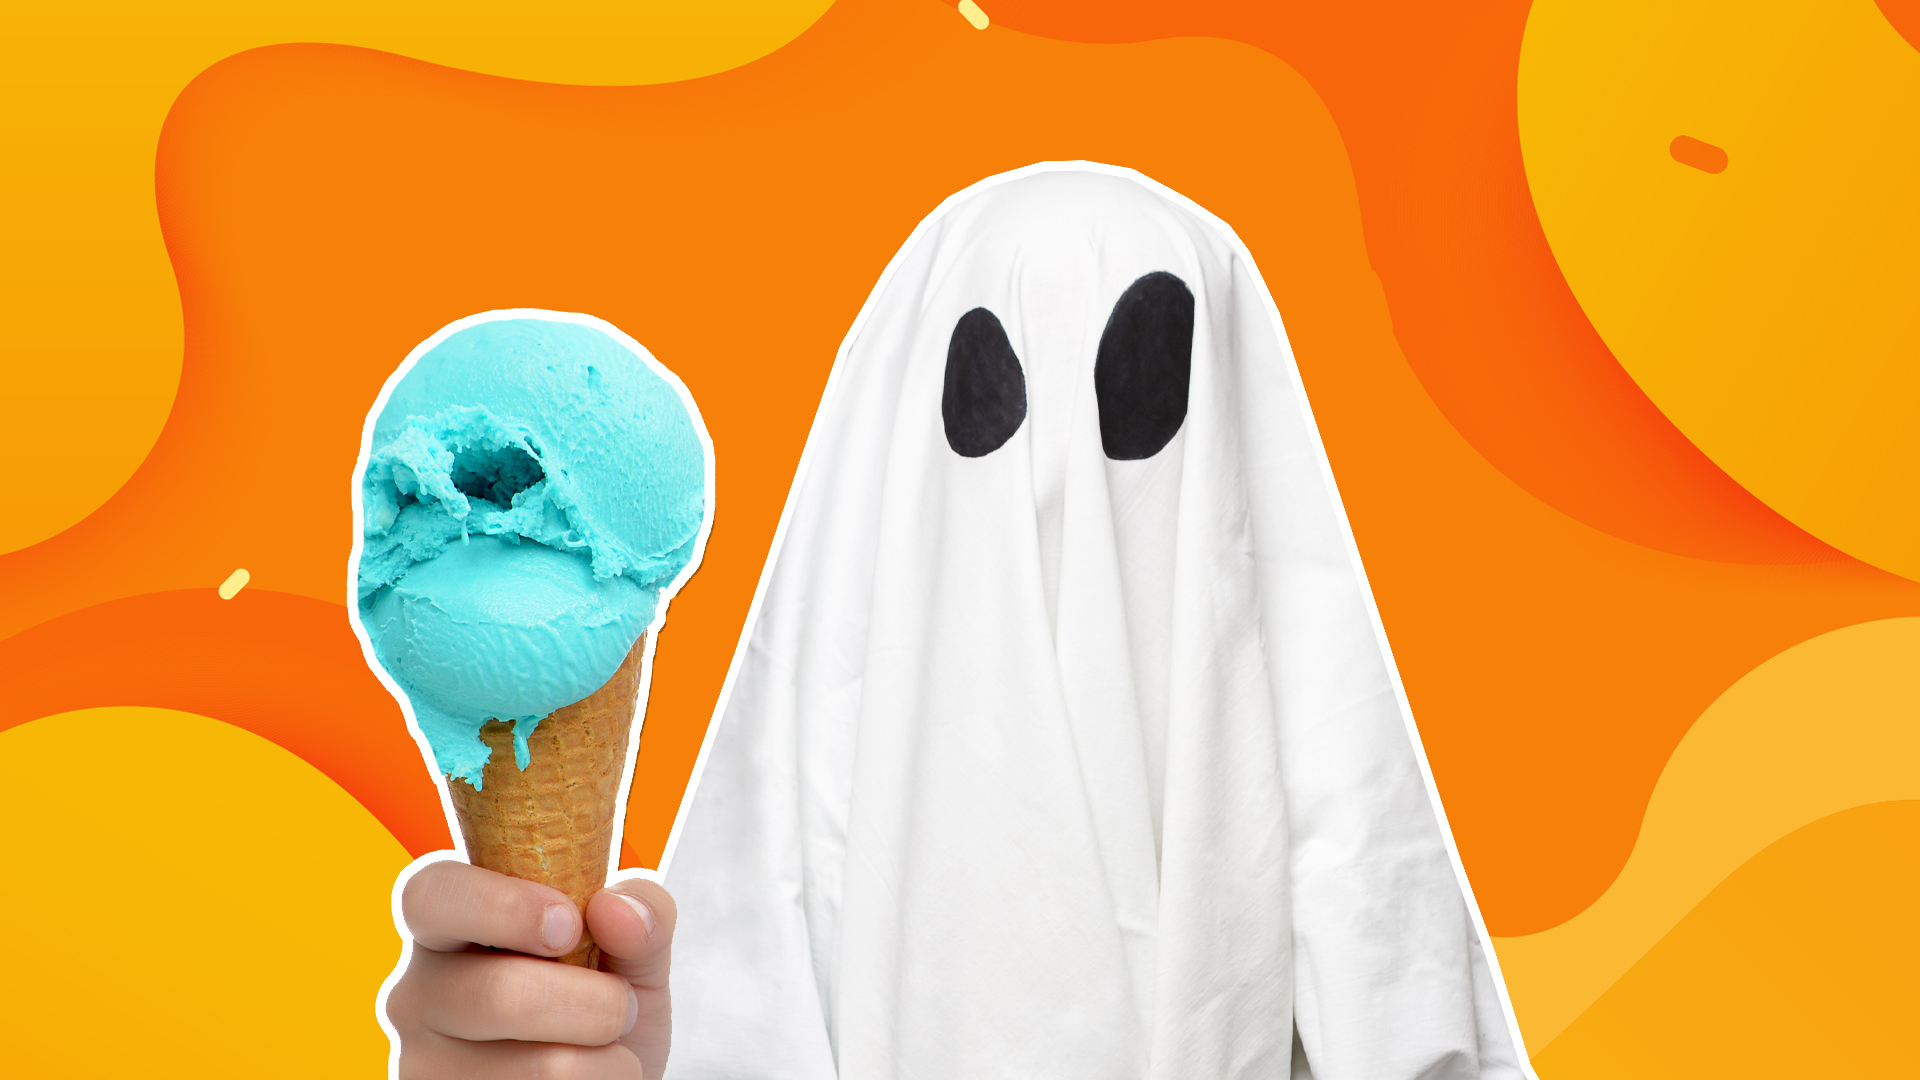 A ghost holding an ice cream